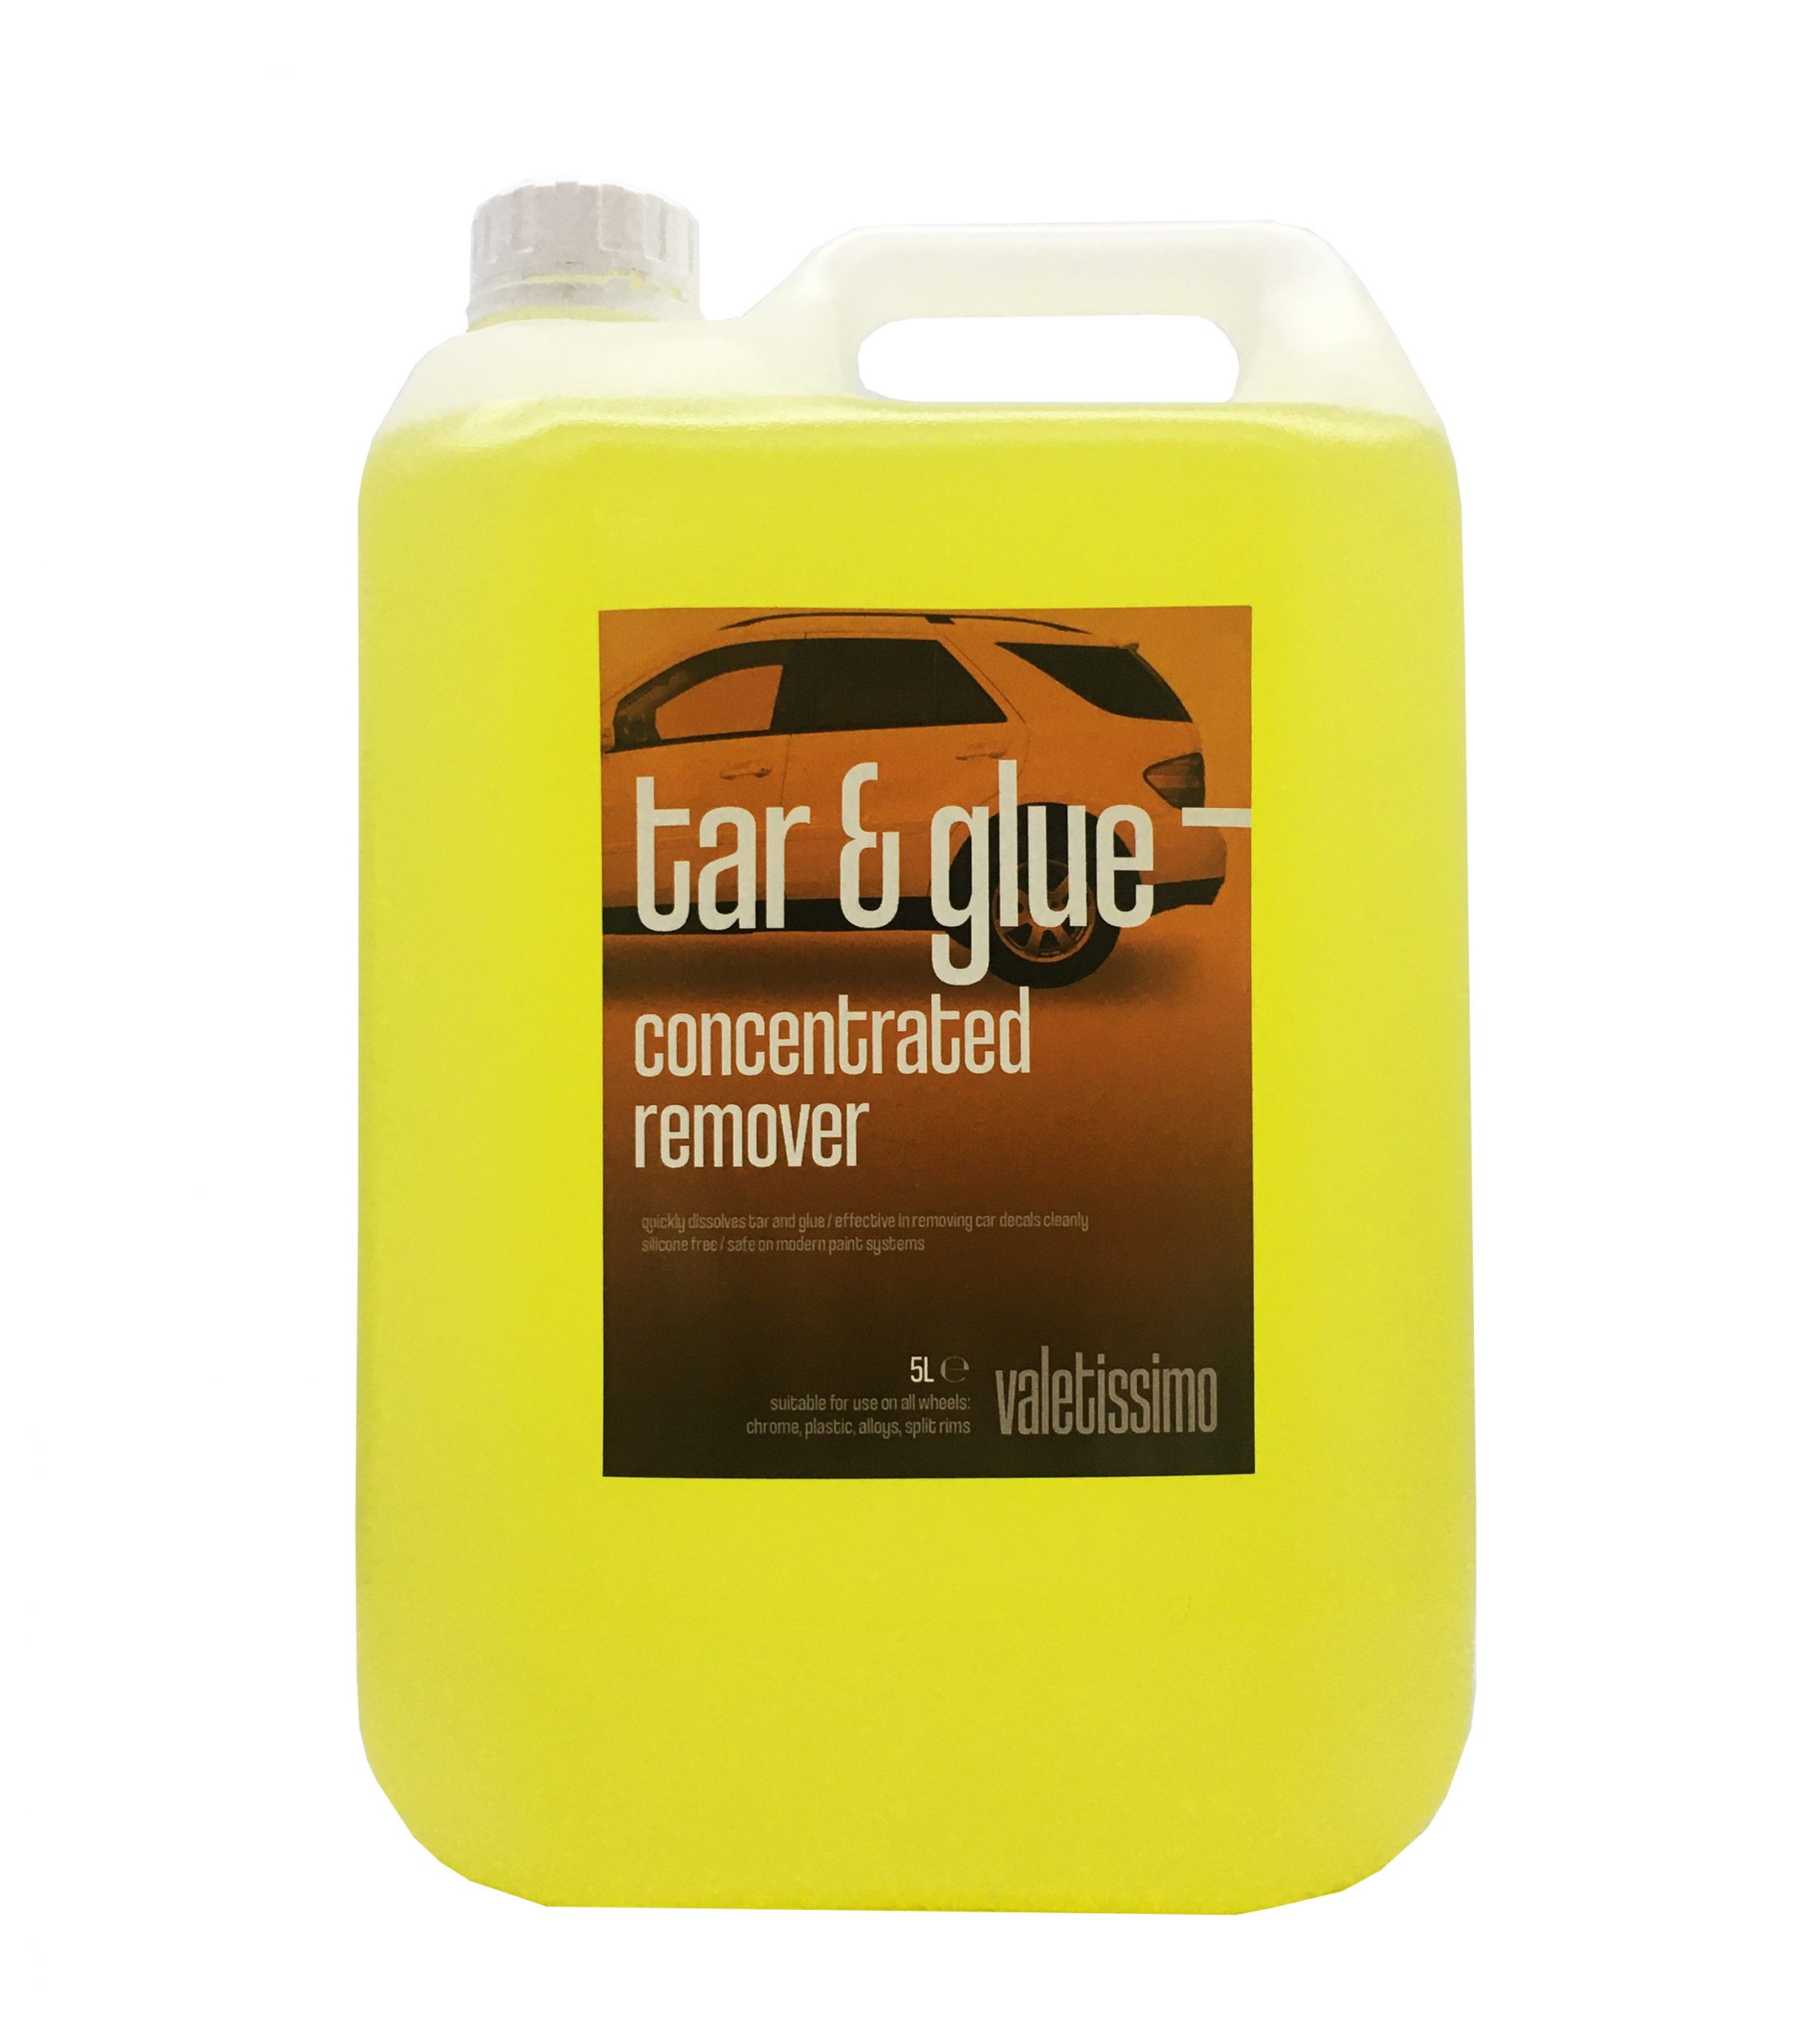 Tar and Glue Remover by Valetissimo - Trade Chemicals 500ml 1L 5L 25L